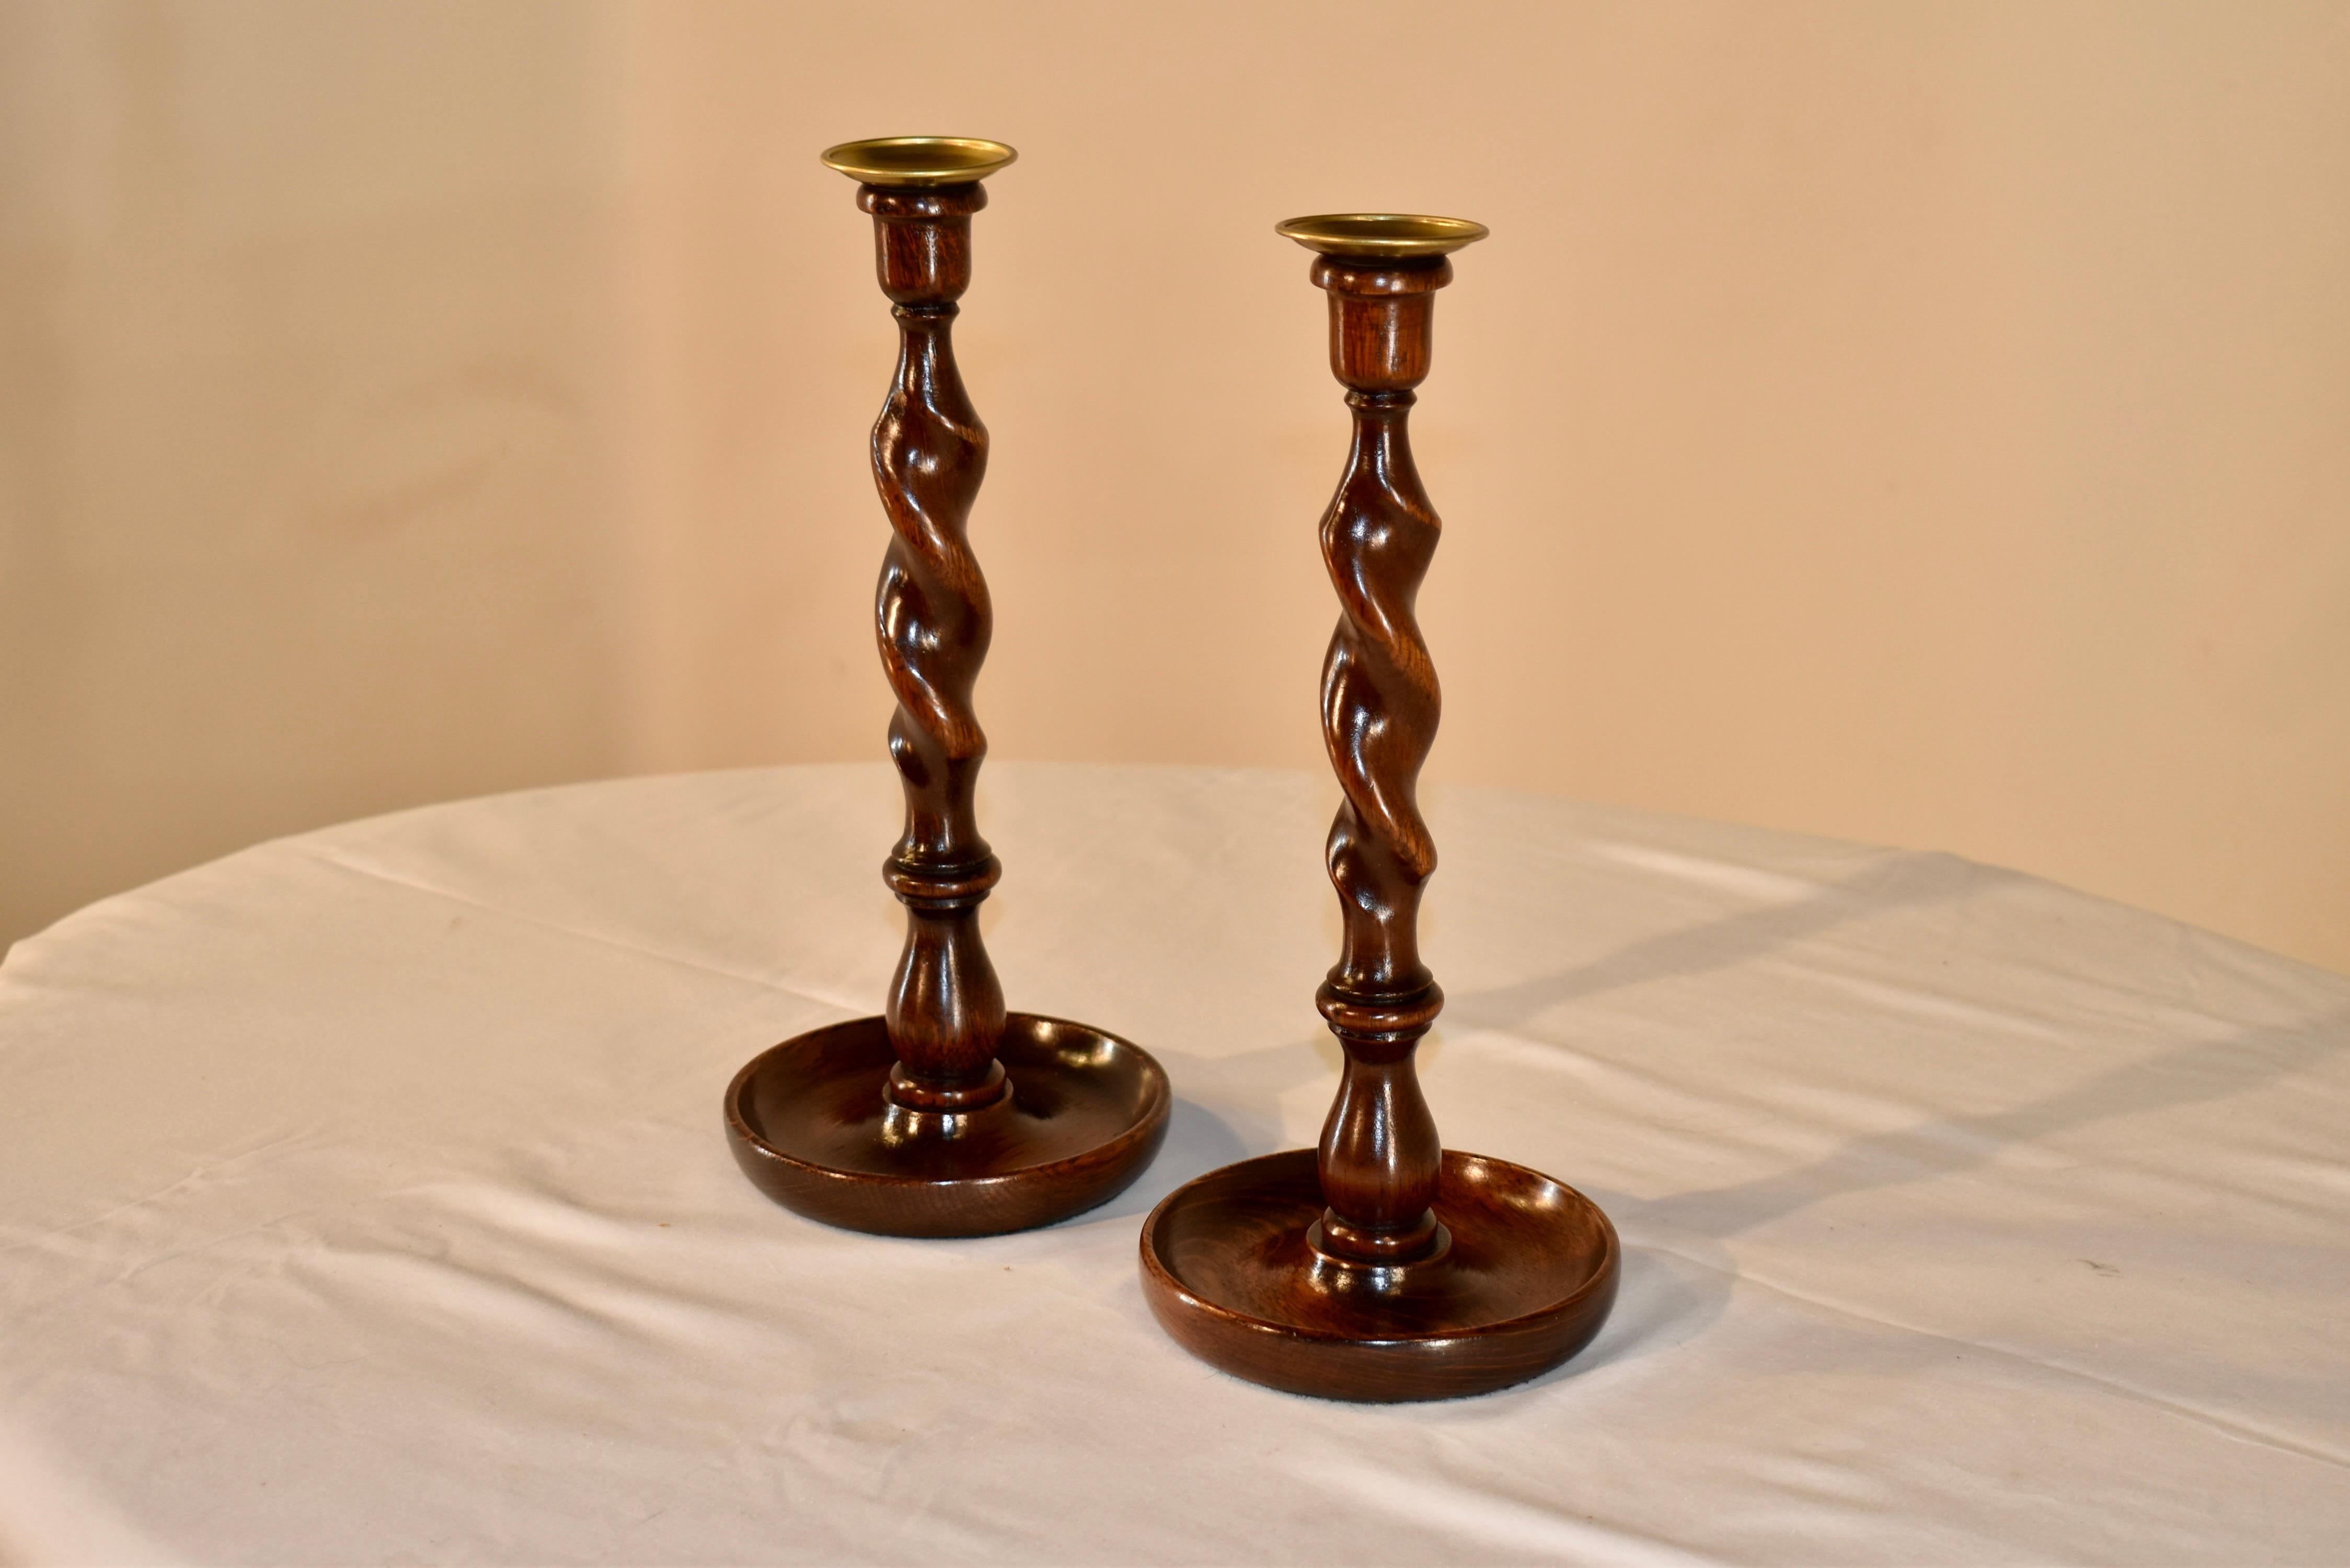 Pair of 19th century oak candlesticks from England. The bobeches are hand turned brass, following down to hand turned candle cups, which are supported on turned barley twist stems, resting on hand turned dish shaped bases. Lovely turning and height.